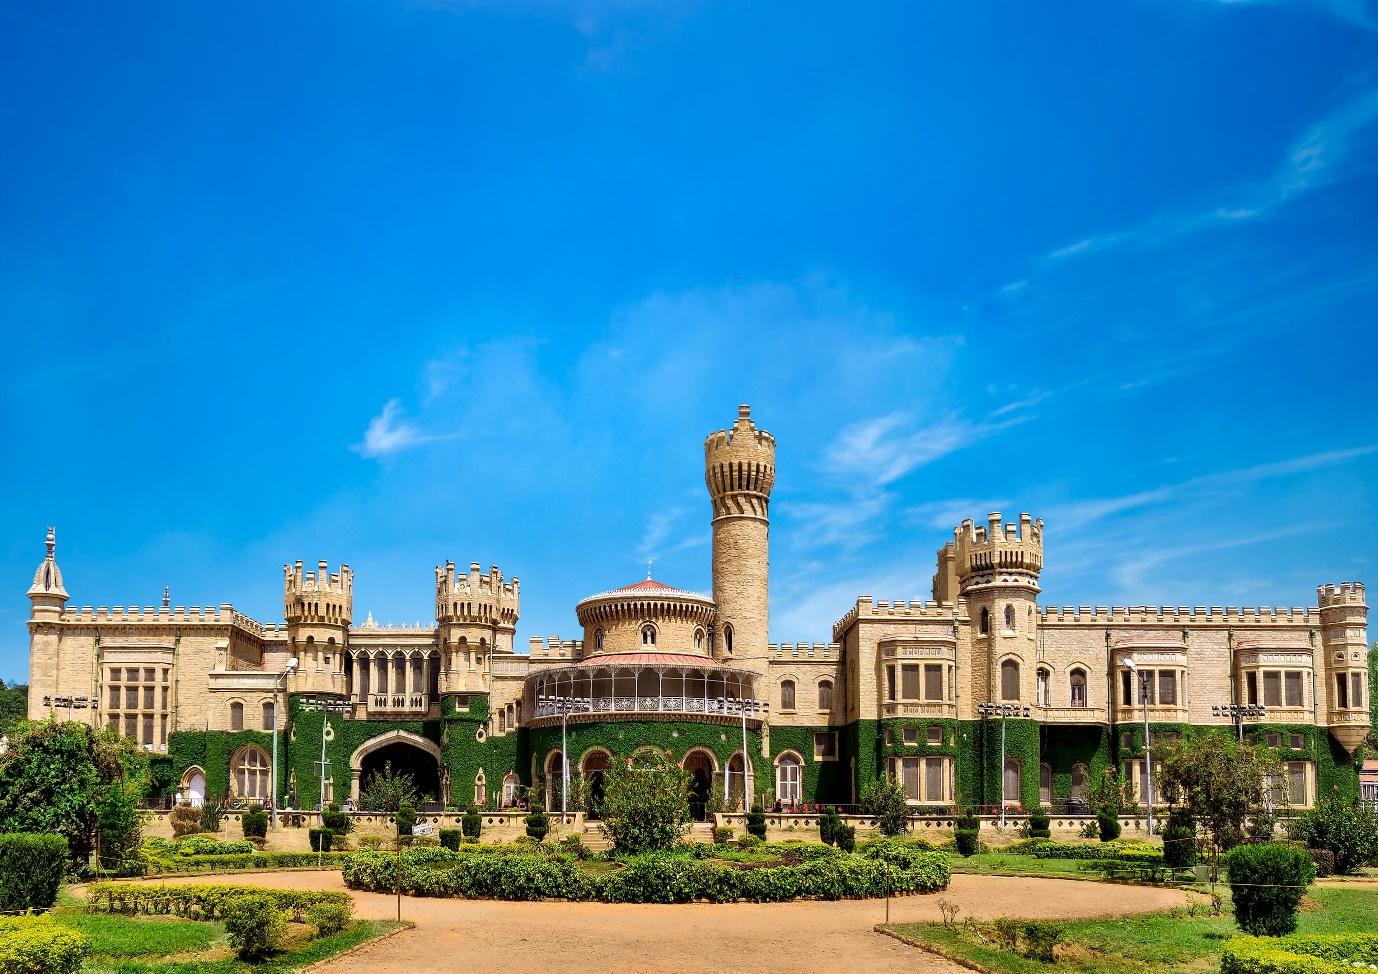 Bangalore’s Palace in all its greatness | Wedifys